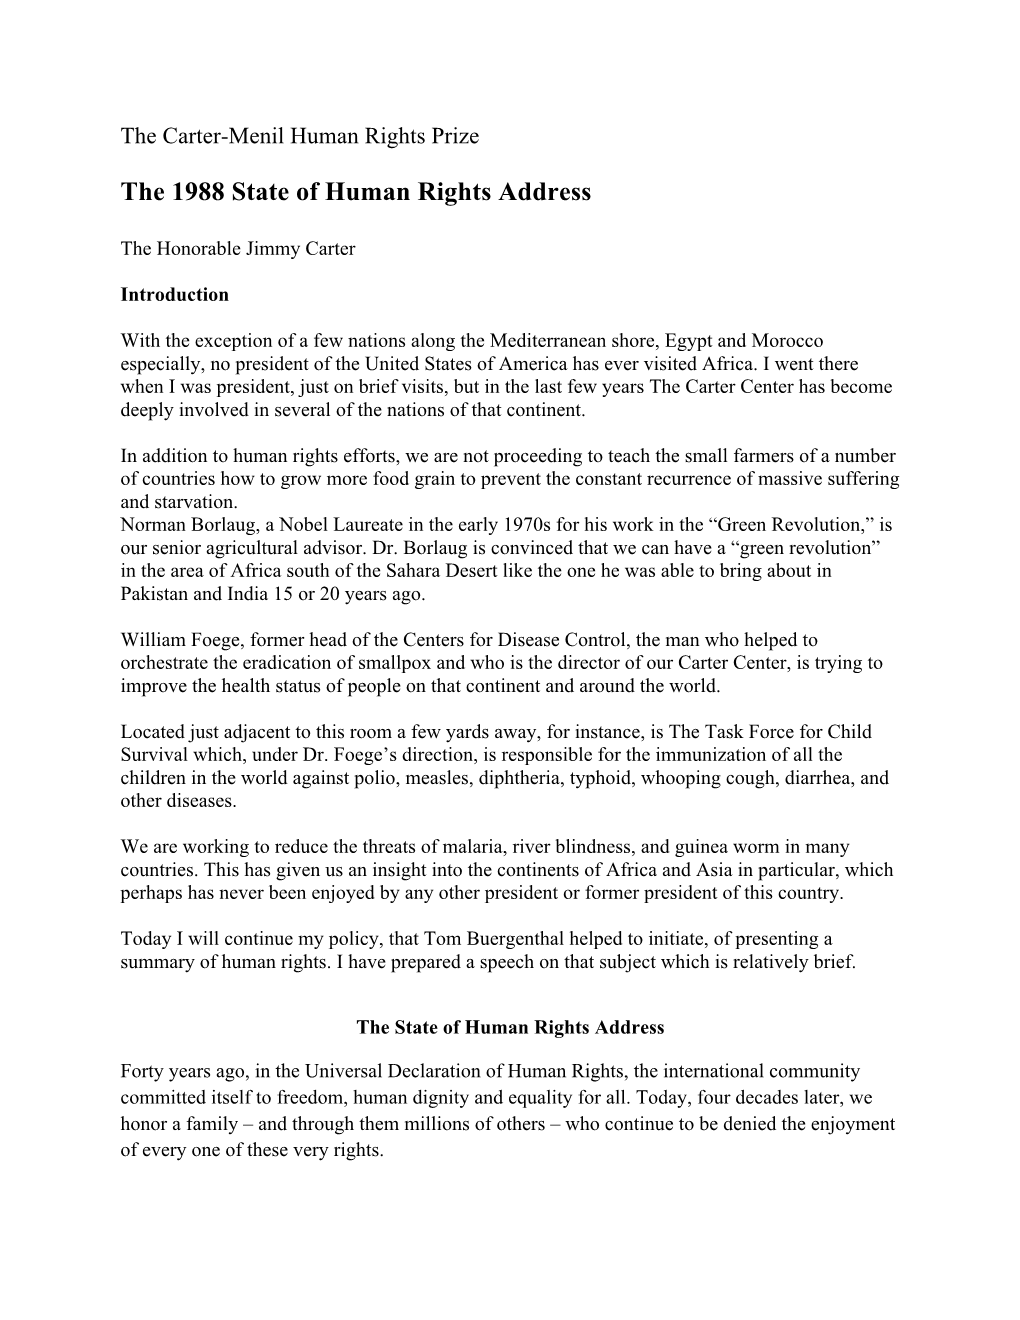 The 1988 State of Human Rights Address